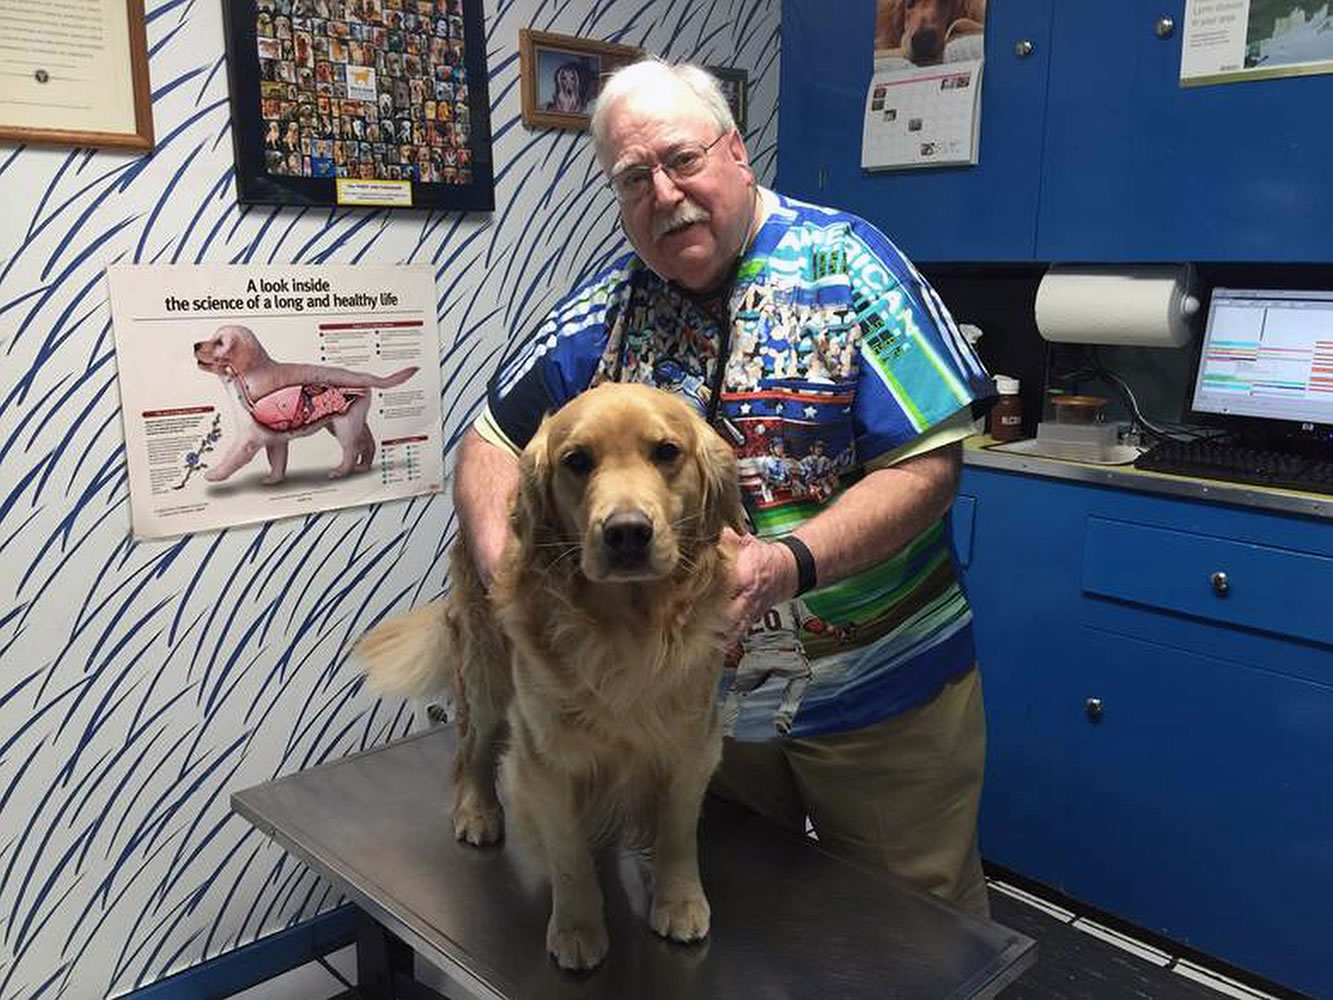 This photo taken April 13, 2015, and provided by Sara Cavallaro shows Dr. Michael Lappin, 66, during an examination of his golden retriever, Isaac, at The Animal House, Lappin?s office in Buzzards Bay, Mass. When Lappin graduated from Michigan State, the average golden retriever was living 16 or 17 years. Today, he says that's down to 9 or 10. The Morris Animal Foundation launched a lifetime cancer study of 3,000 dogs to see if they could figure out why so many are dying so young. Isaac is No. 64 in the study.